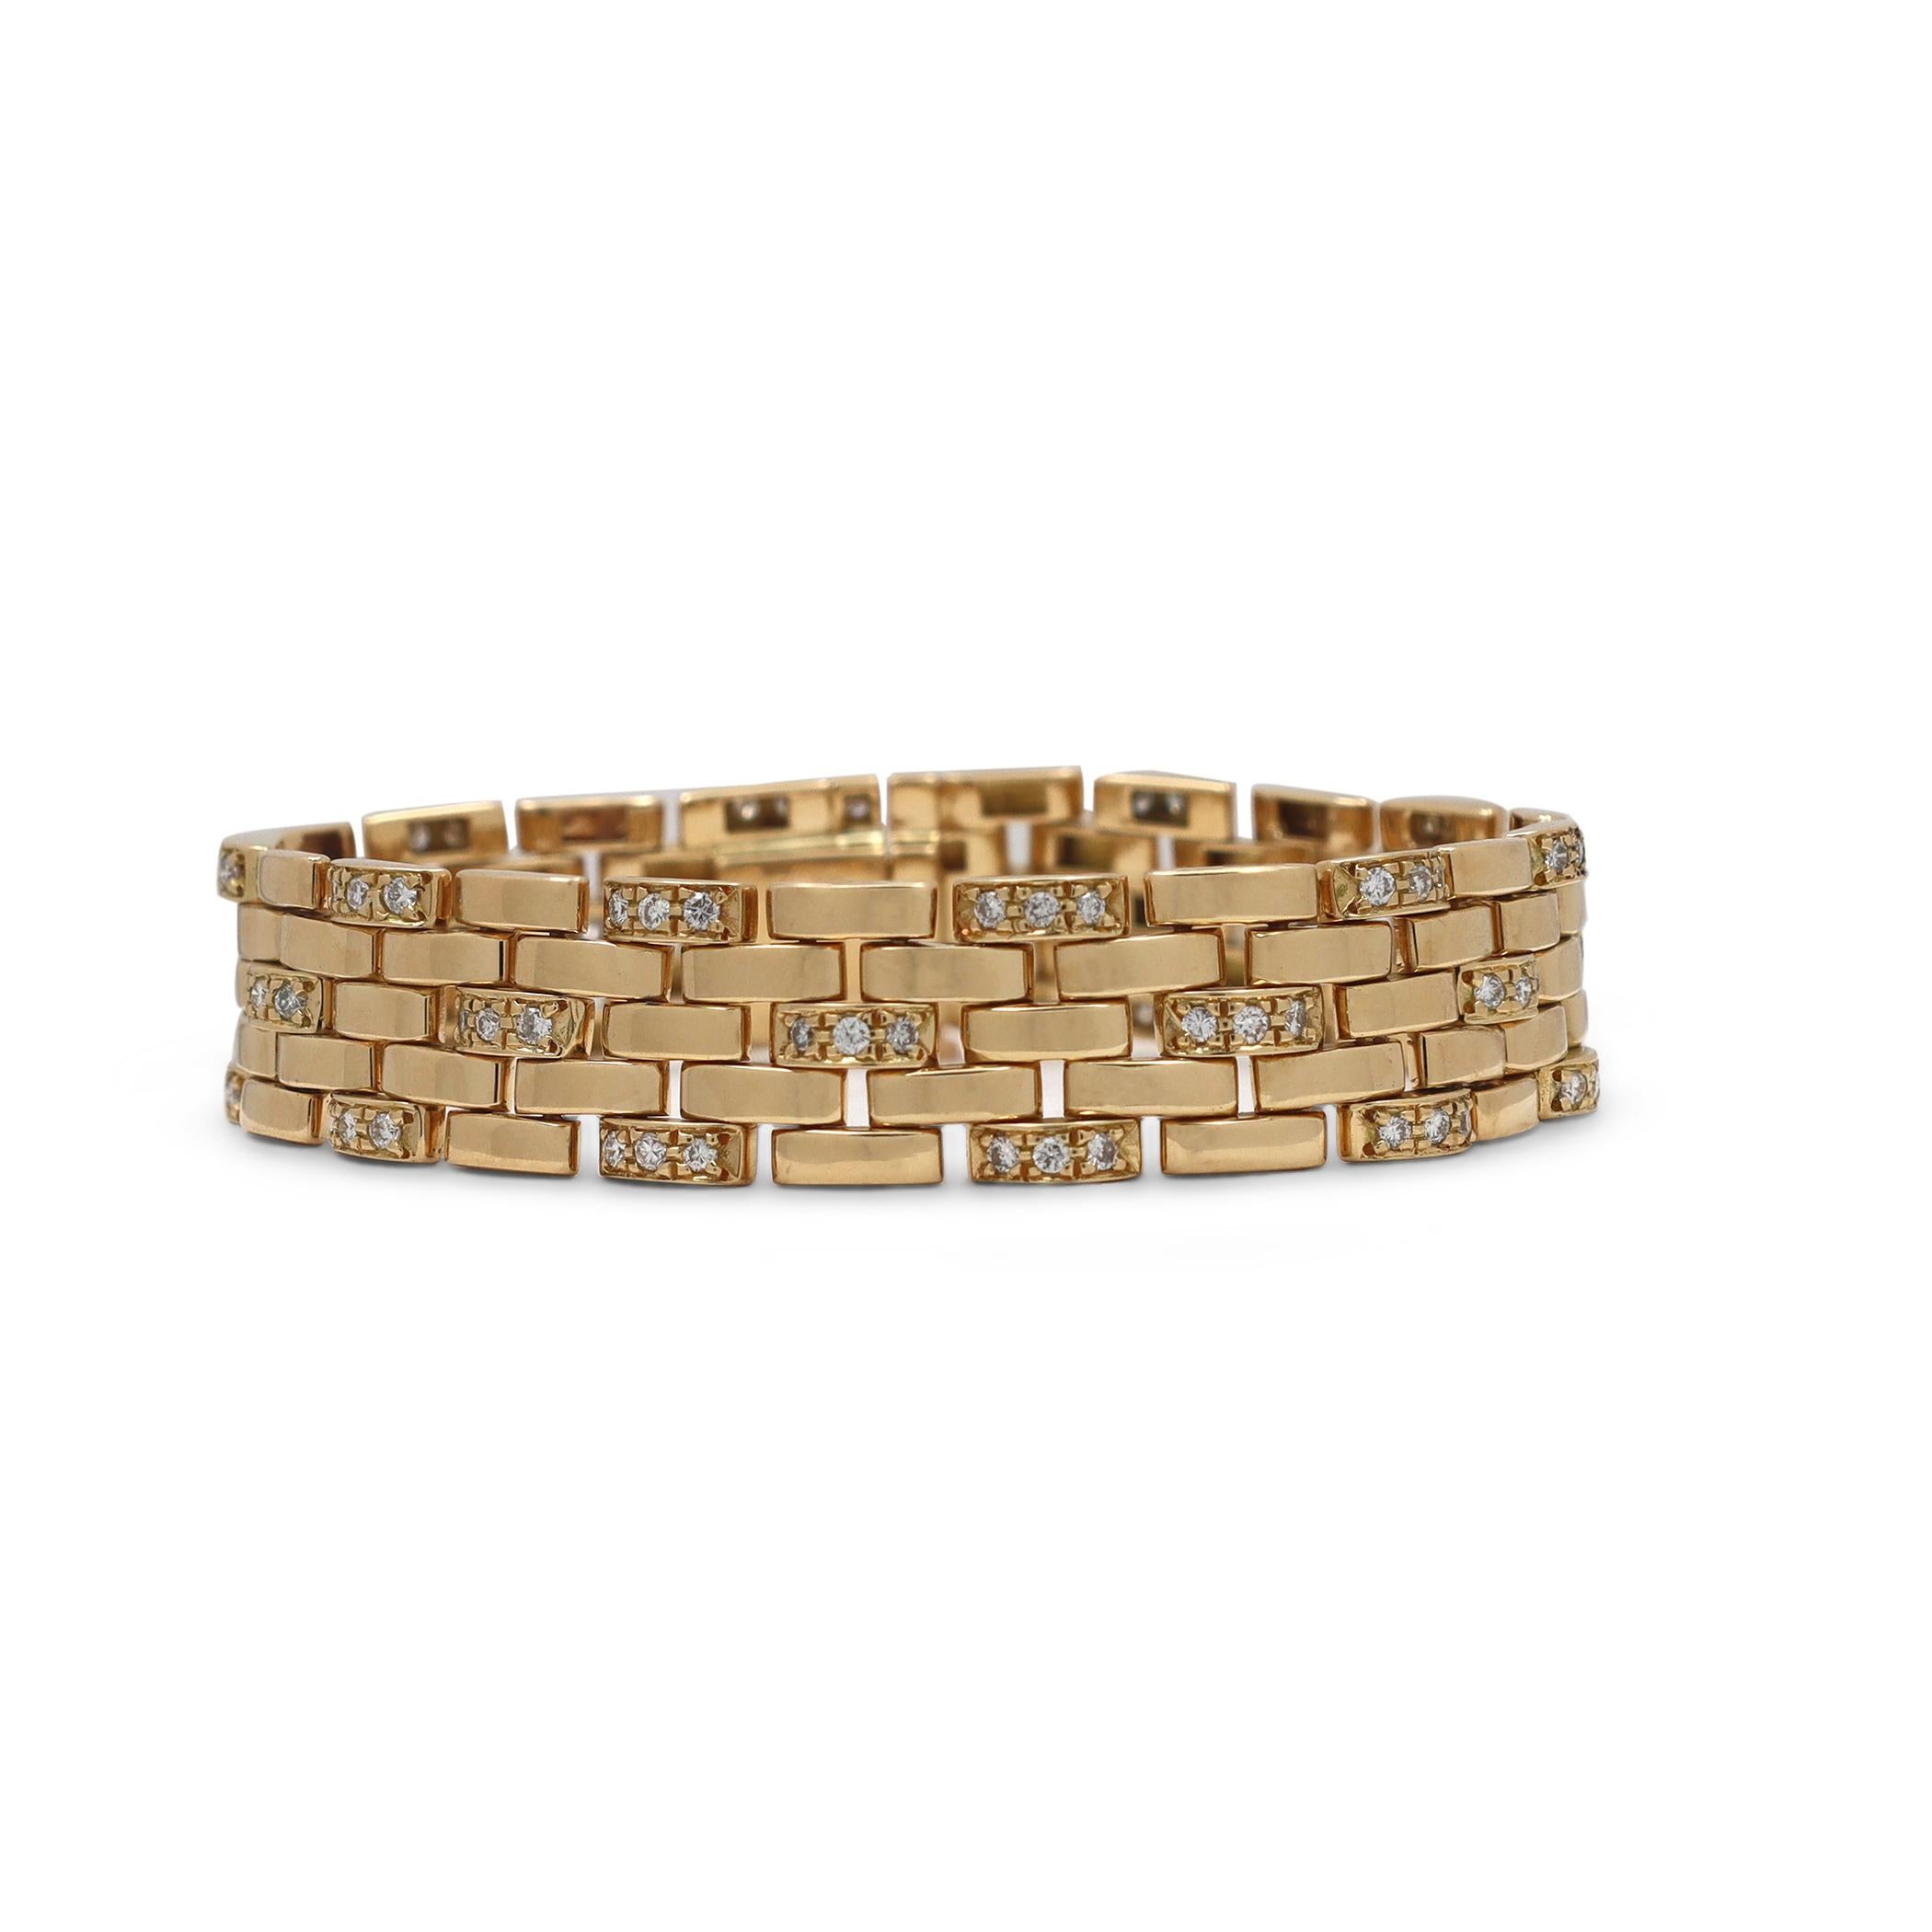 Authentic Cartier 'Maillon Panthère' five-row bracelet crafted in 18 karat yellow gold and set with an estimated .95 carats of high quality round brilliant cut diamonds. The bracelet measures 7 inches in length. Signed Cartier, 750, with serial